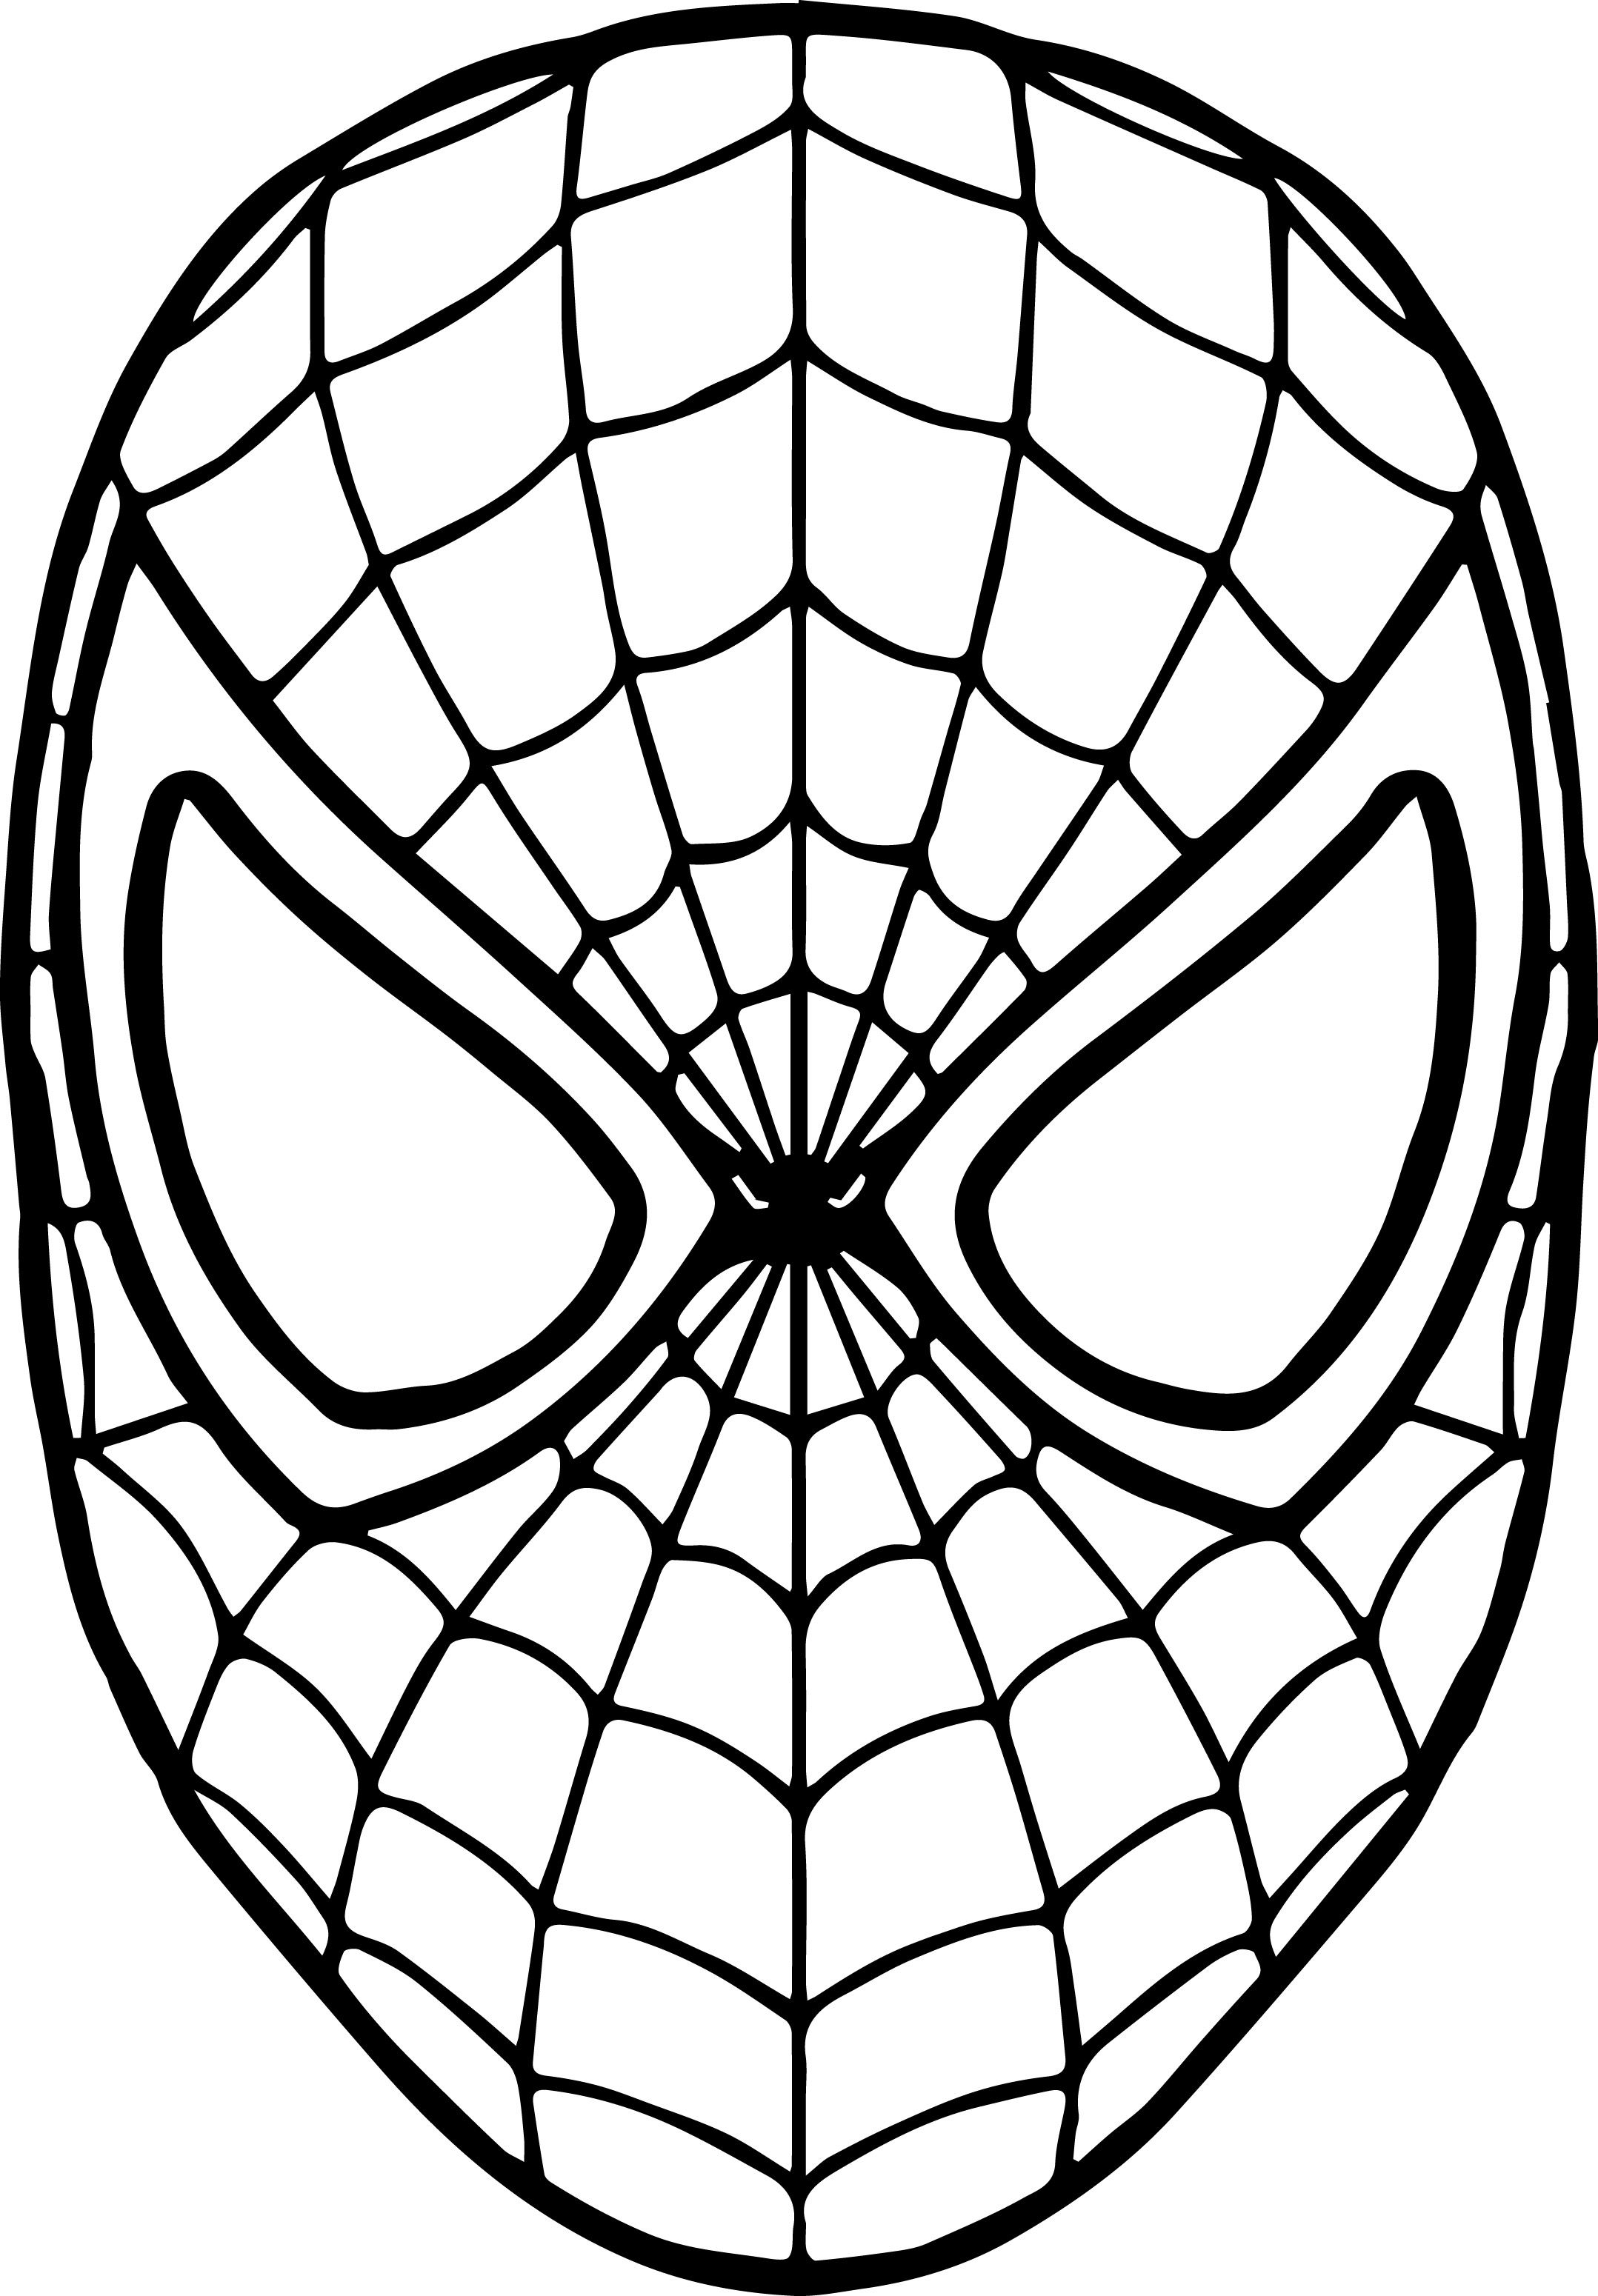 spiderman-mask-coloring-page-spiderman-mask-spiderman-coloring